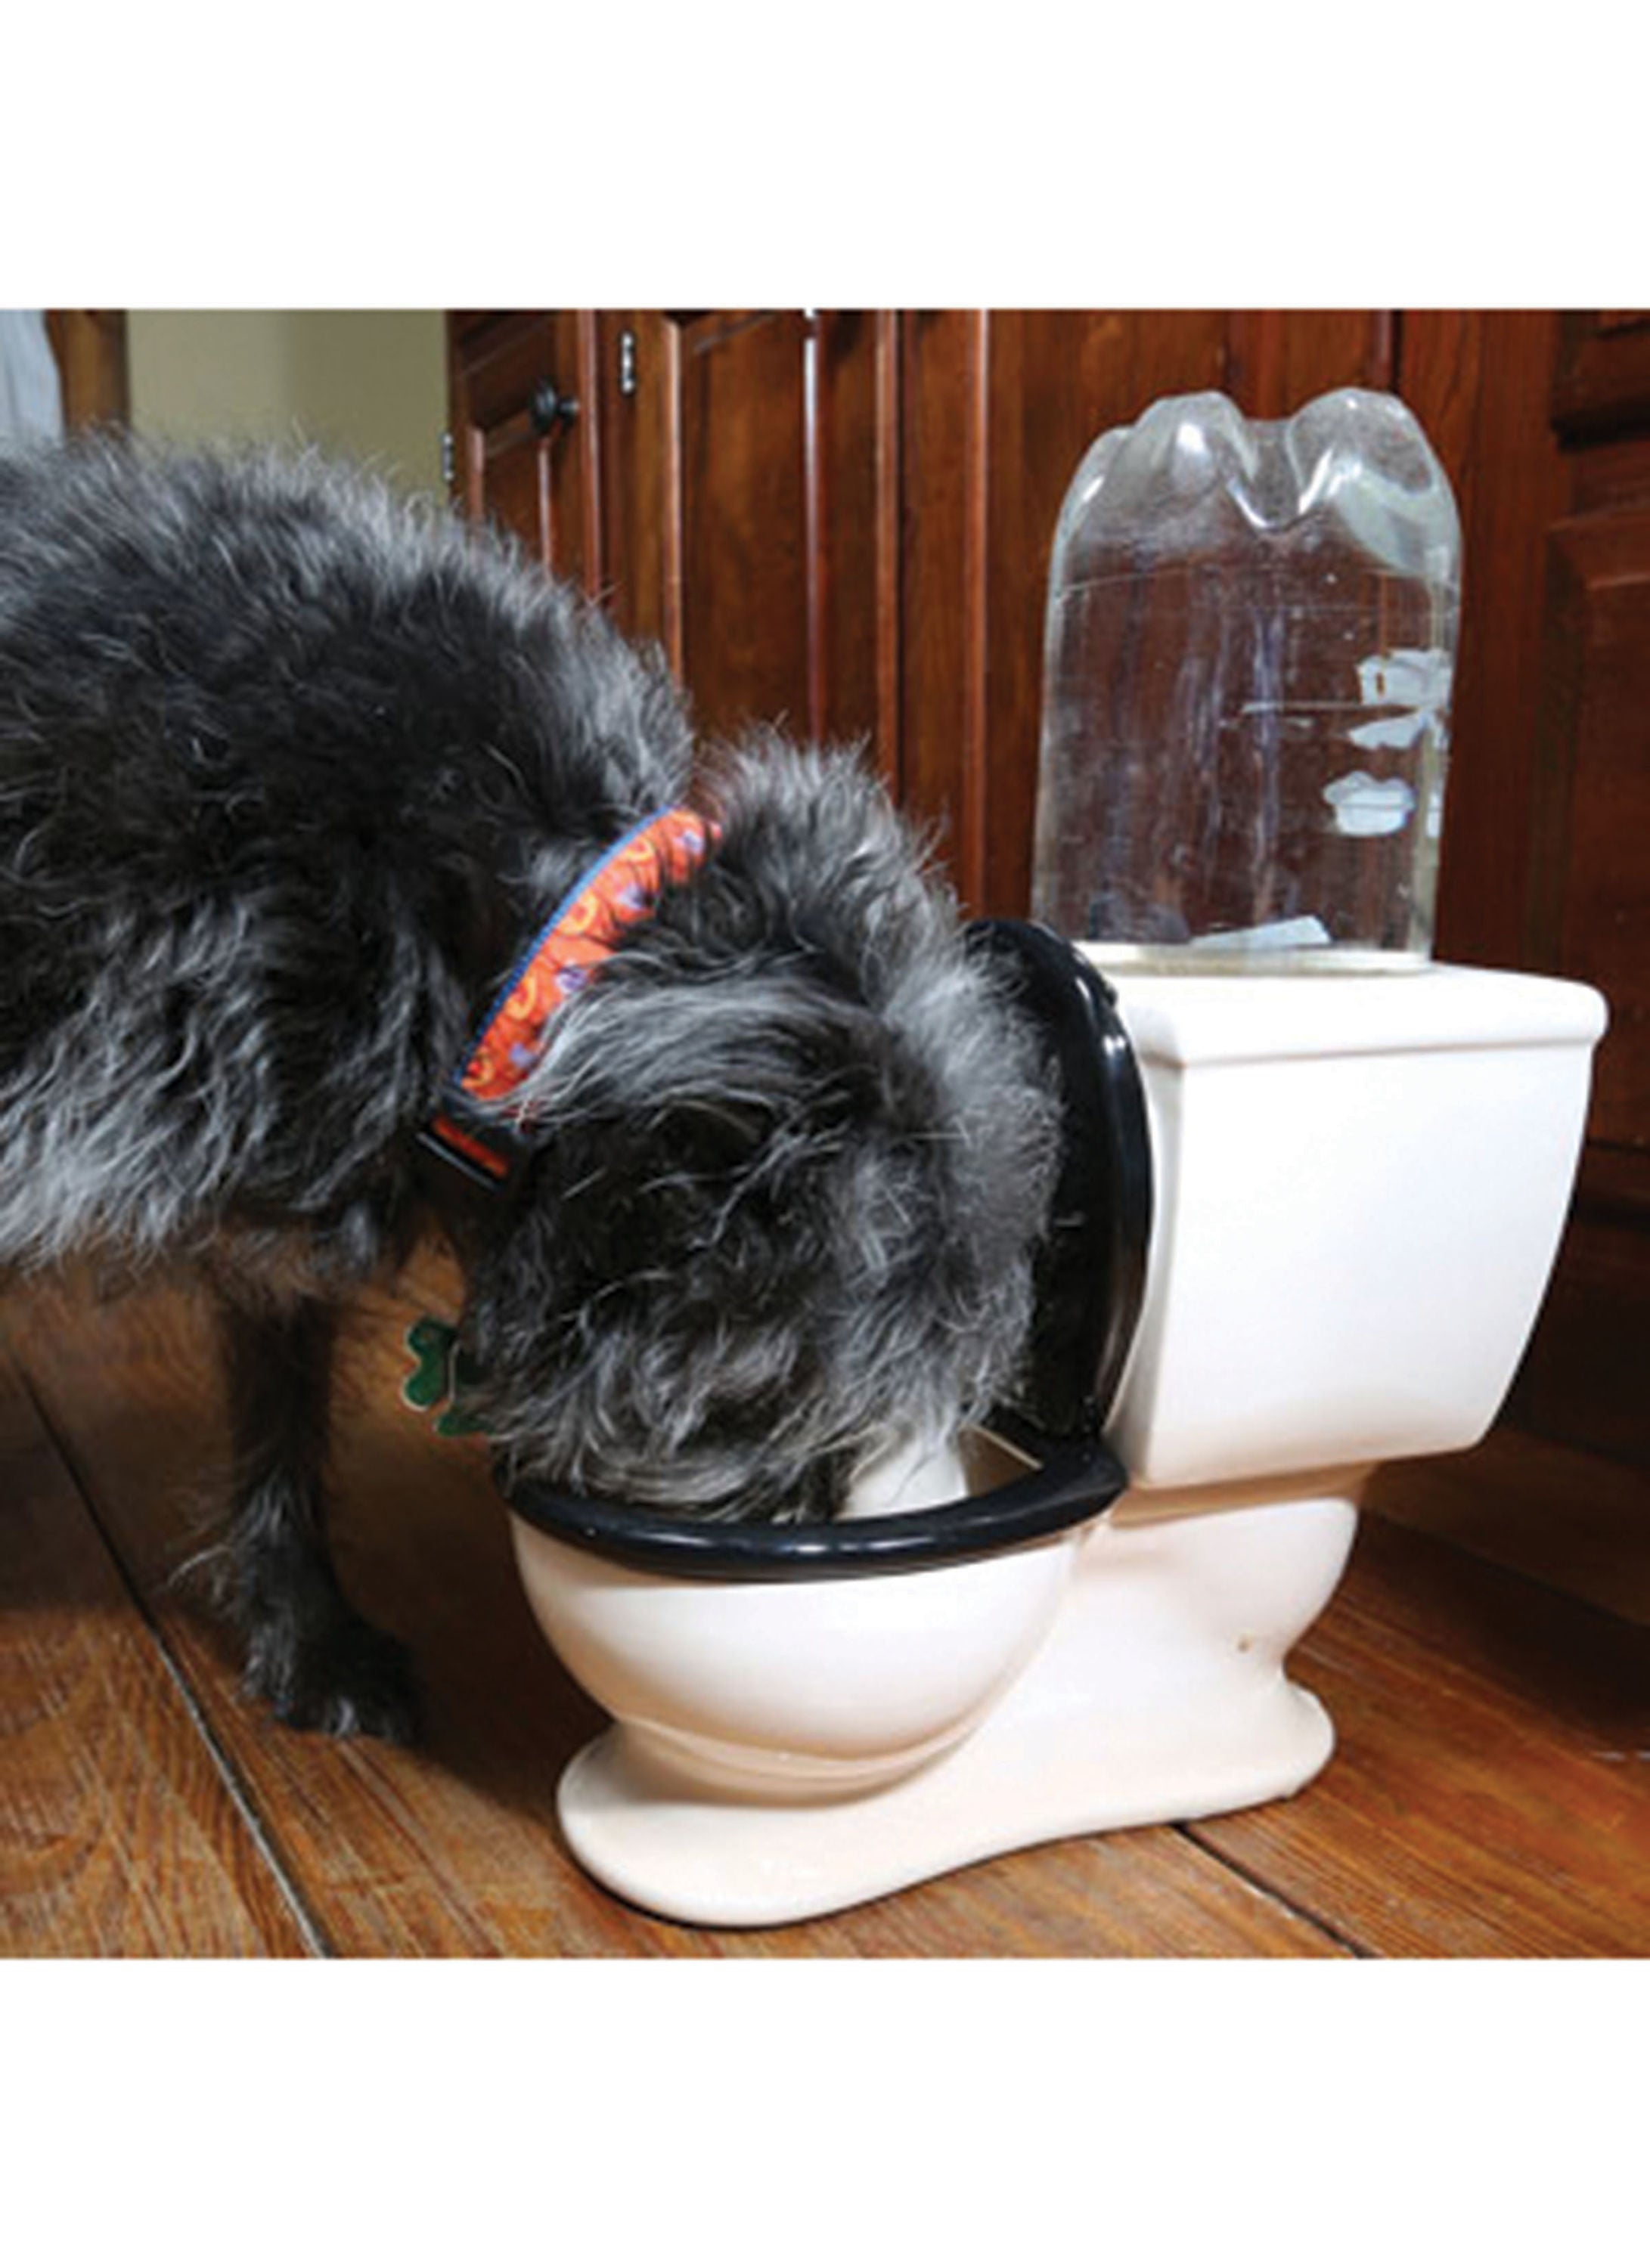 The Toilet Water Dish